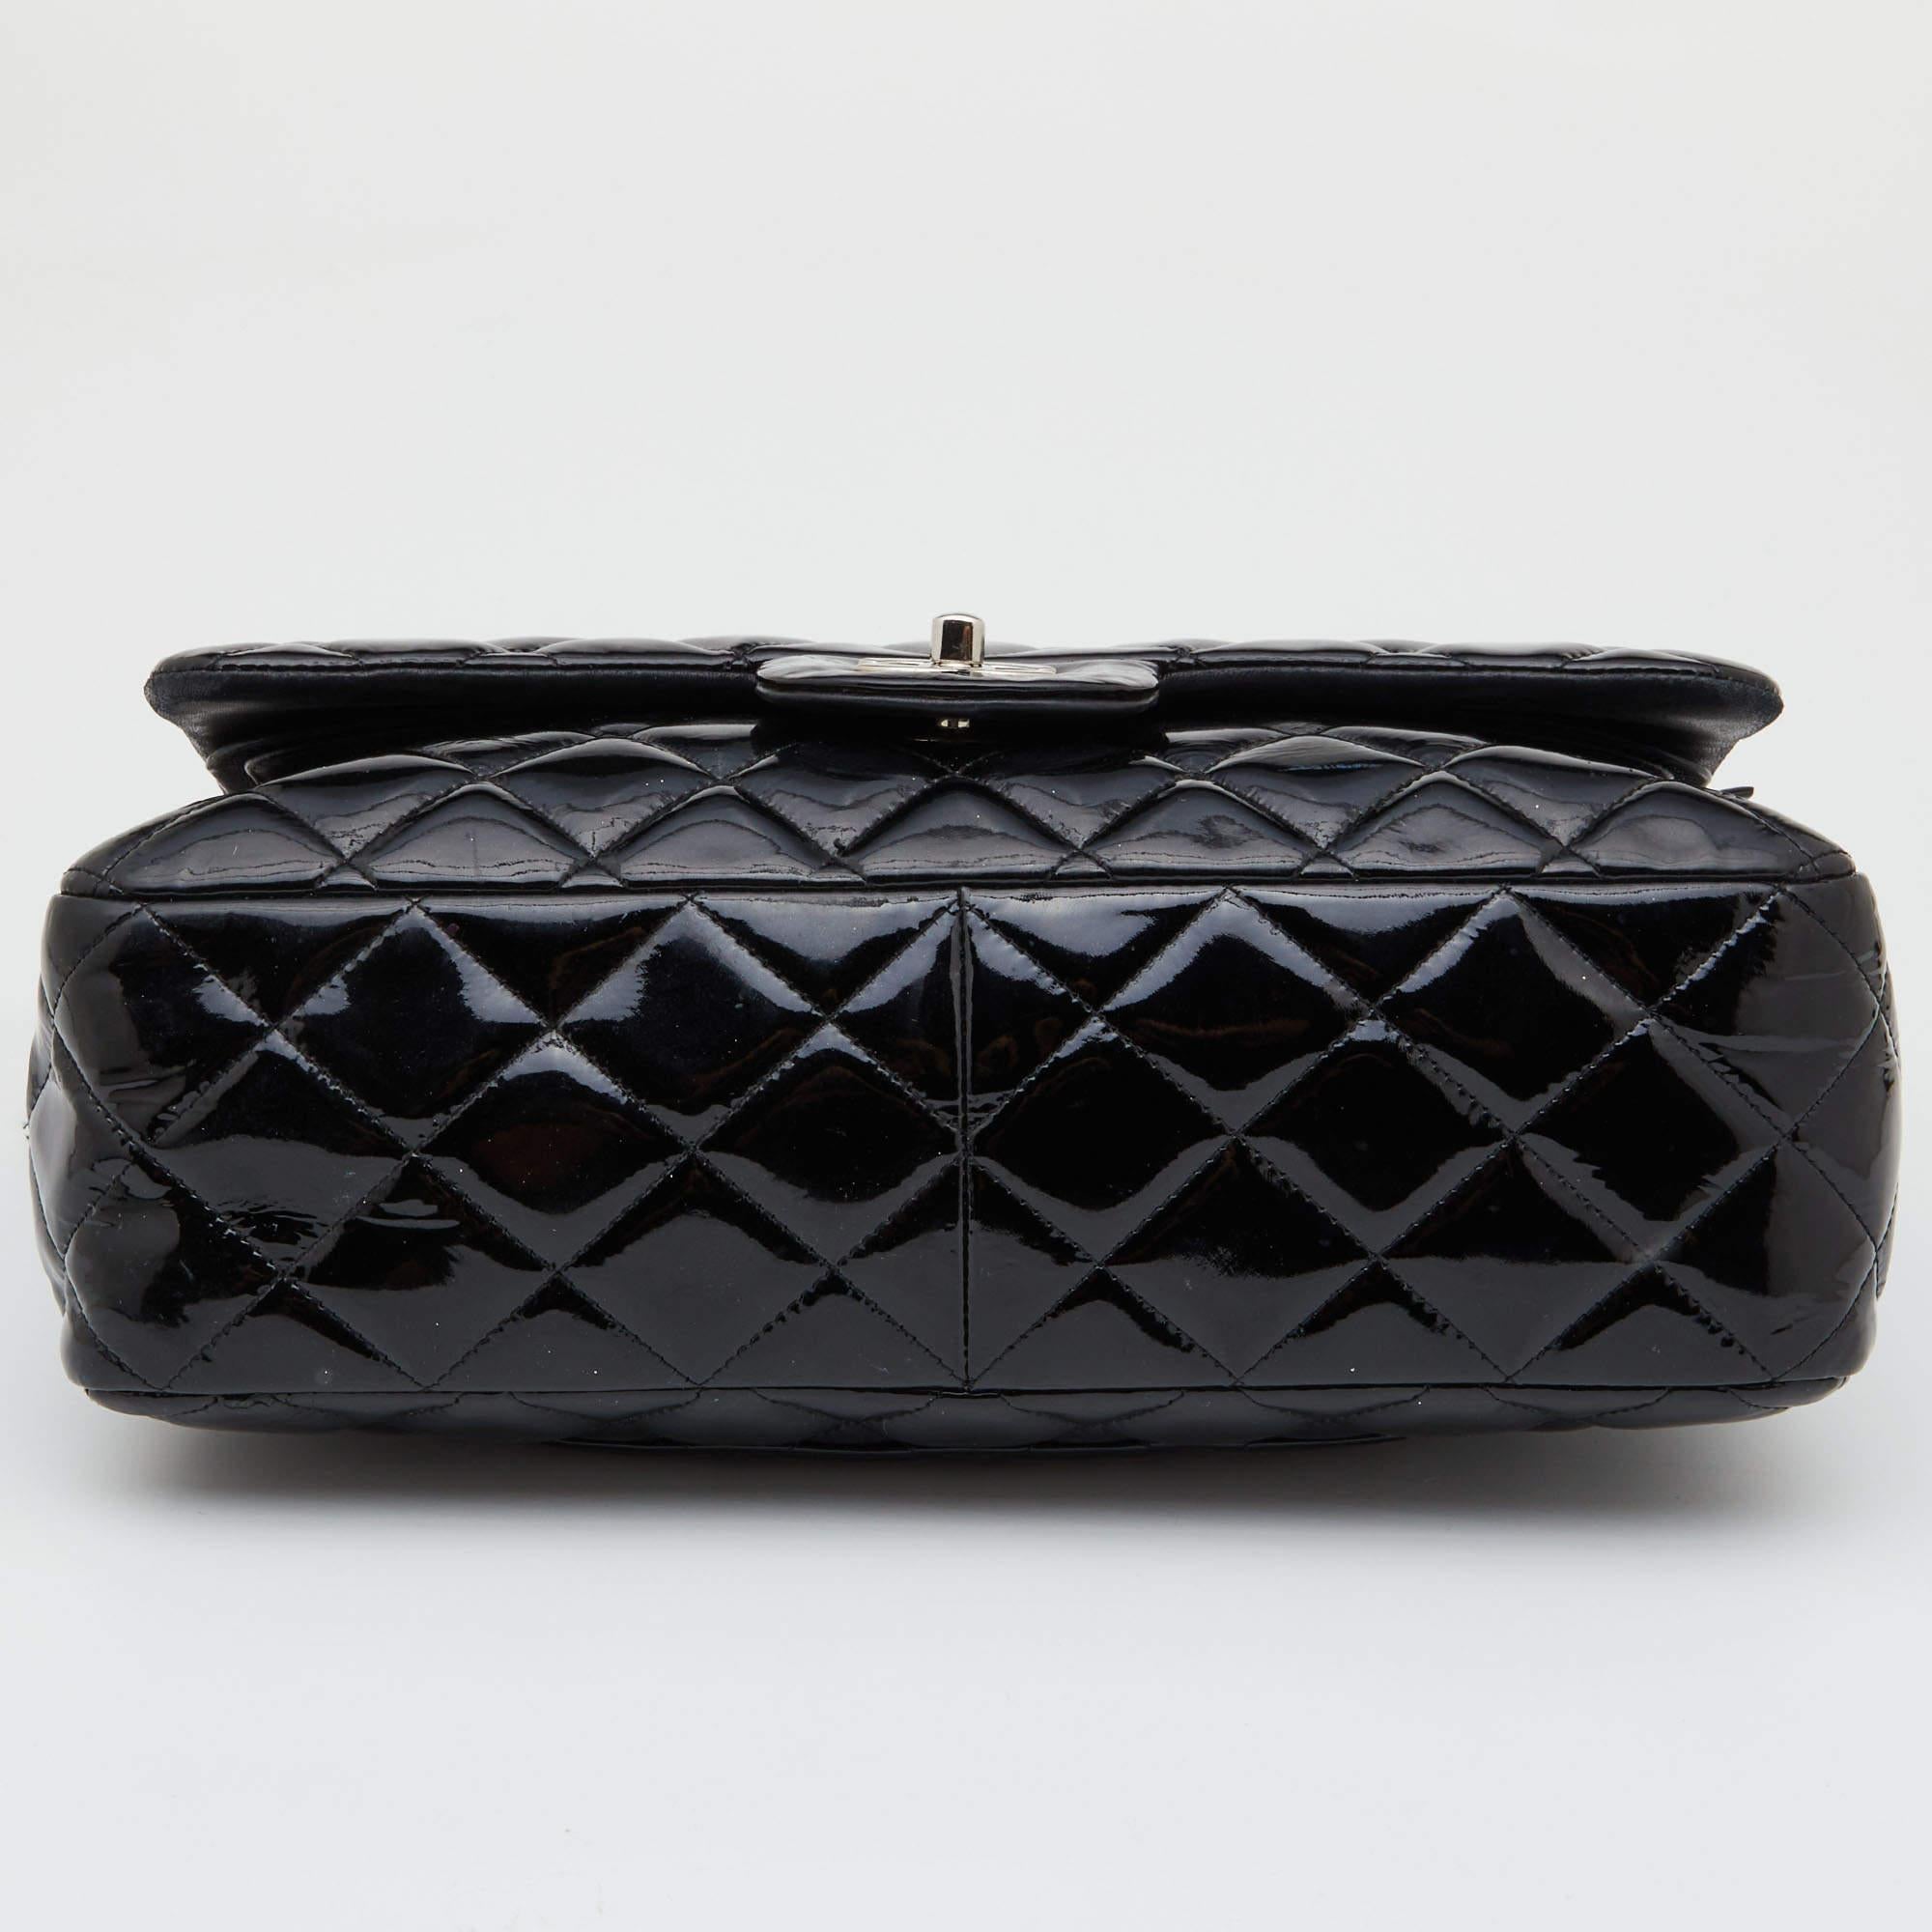 Chanel Black Quilted Patent Leather Jumbo Classic Double Flap Bag 1